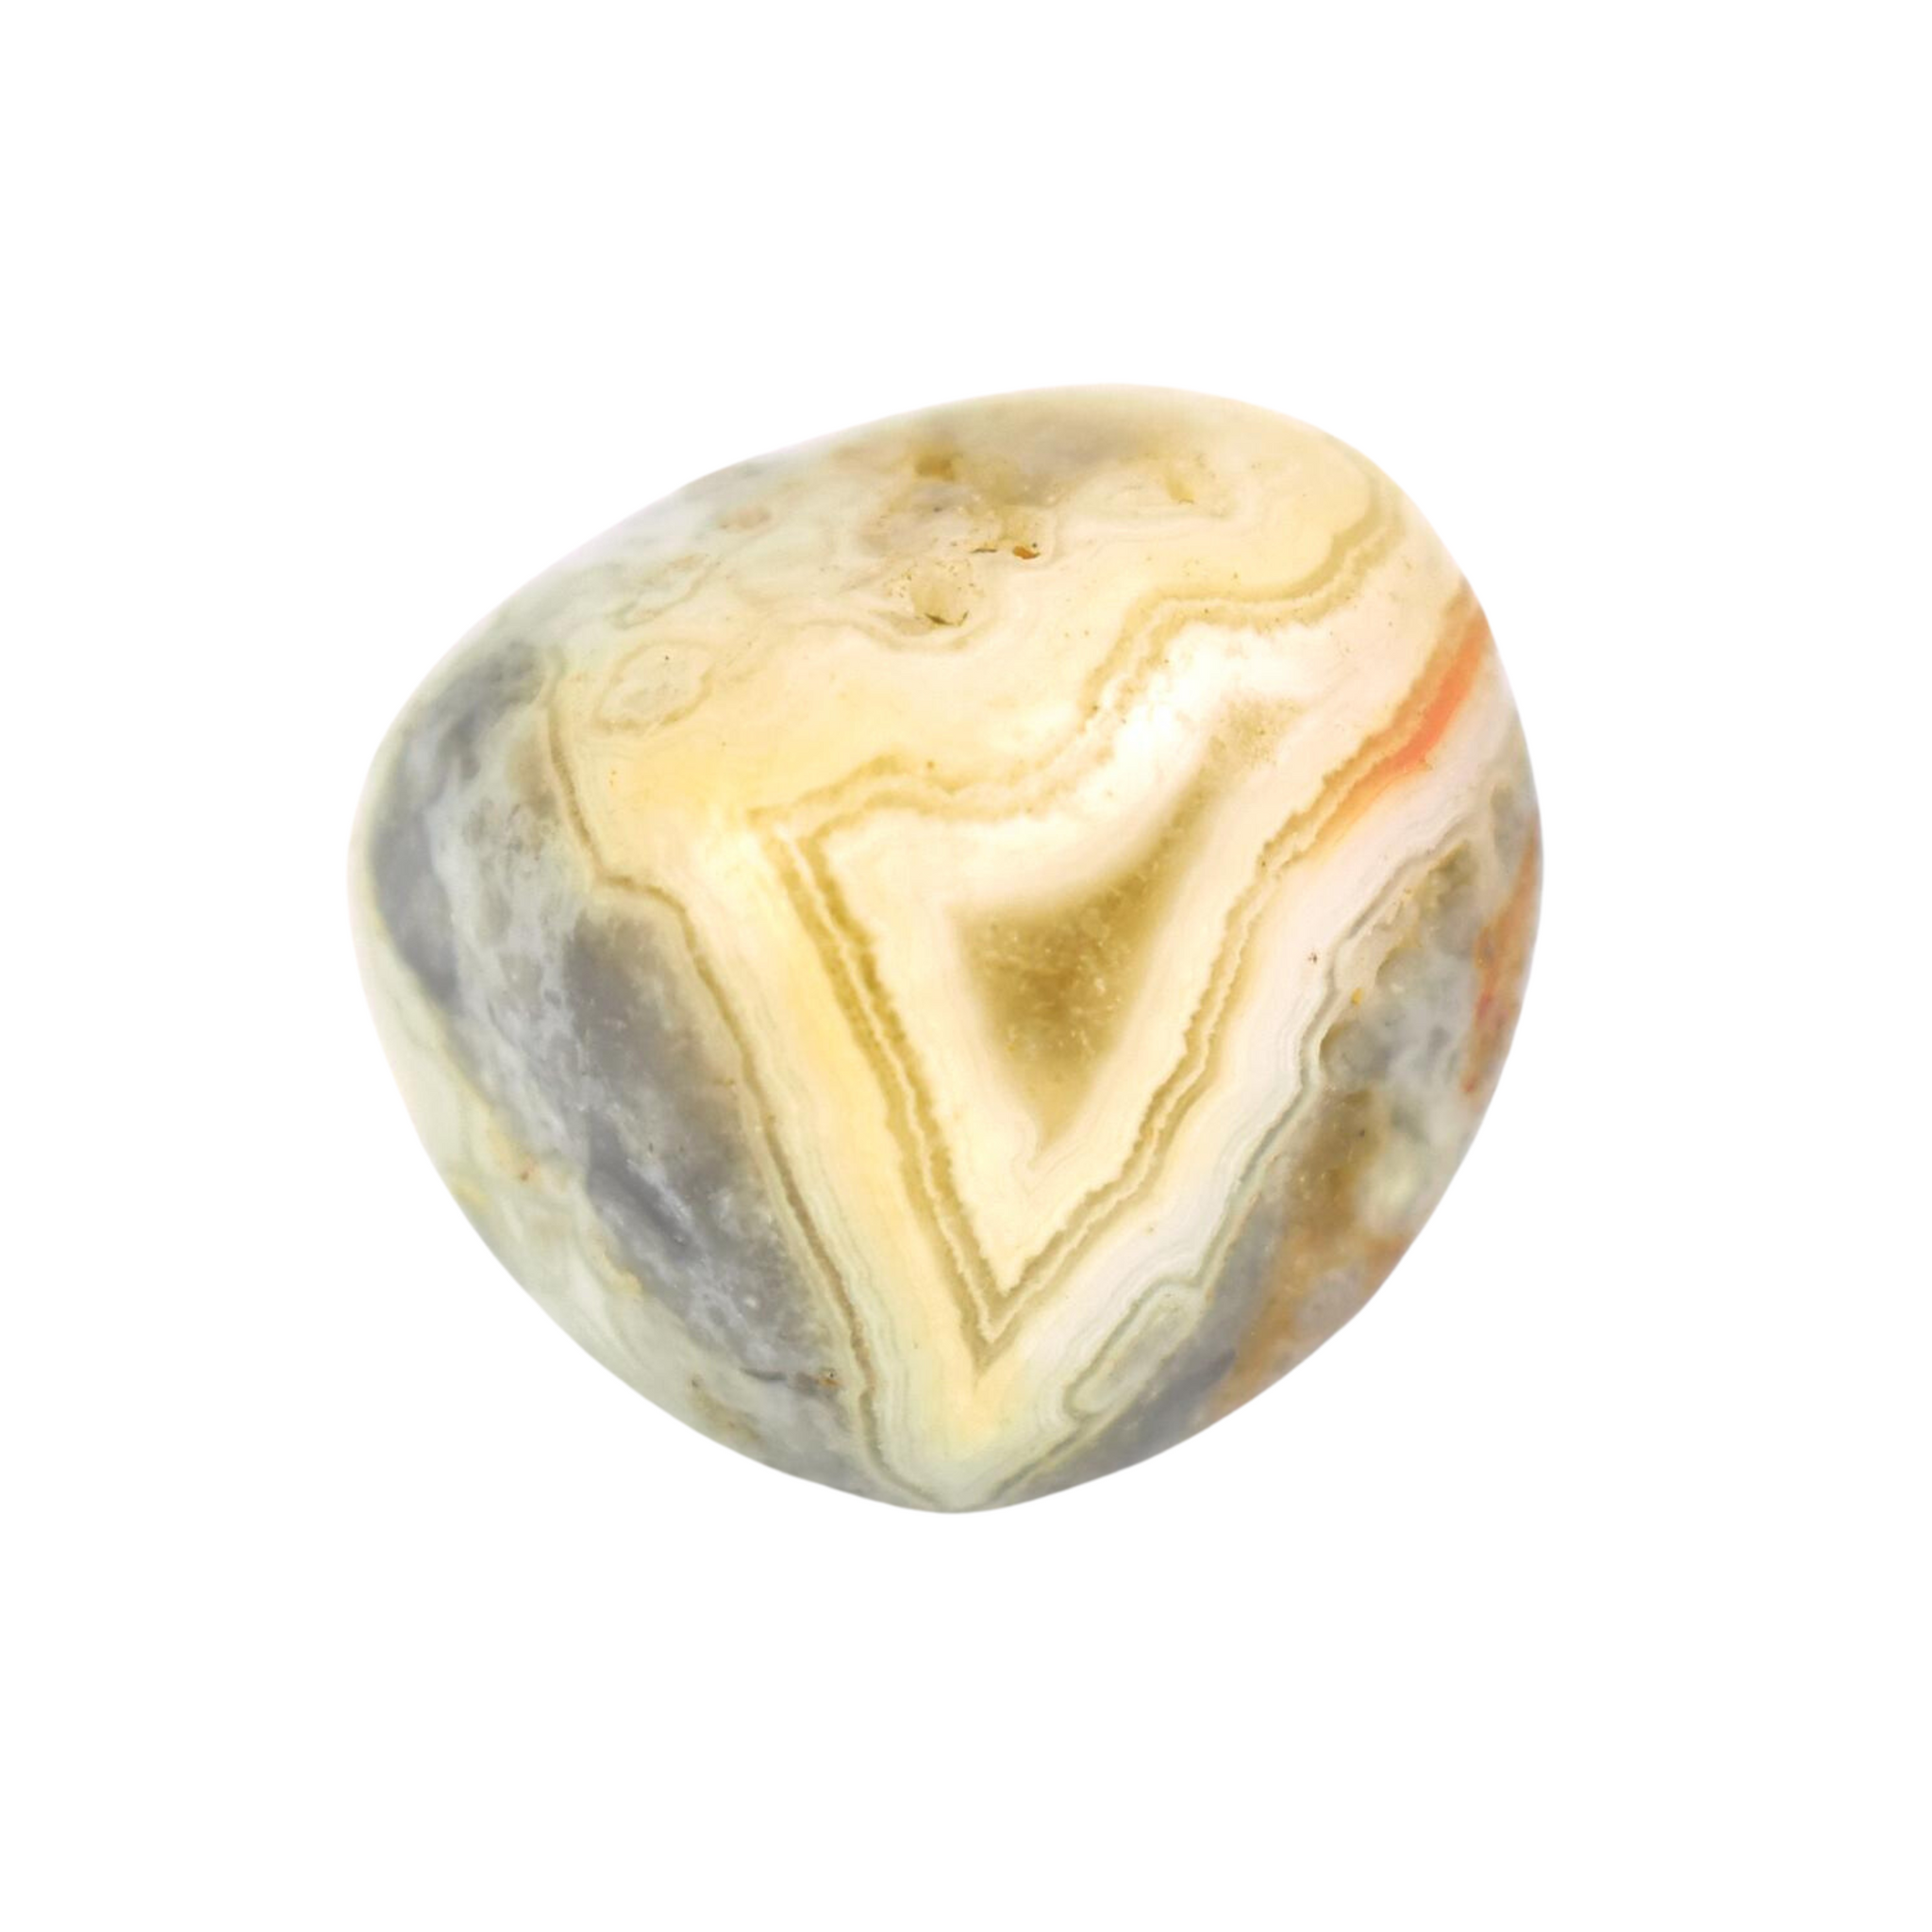 https://www.crystalcharmhealing.com/cdn/shop/files/crazy-lace-agate-crystal-healing-stone-for-sale_1024x1024@2x.png?v=1687986272